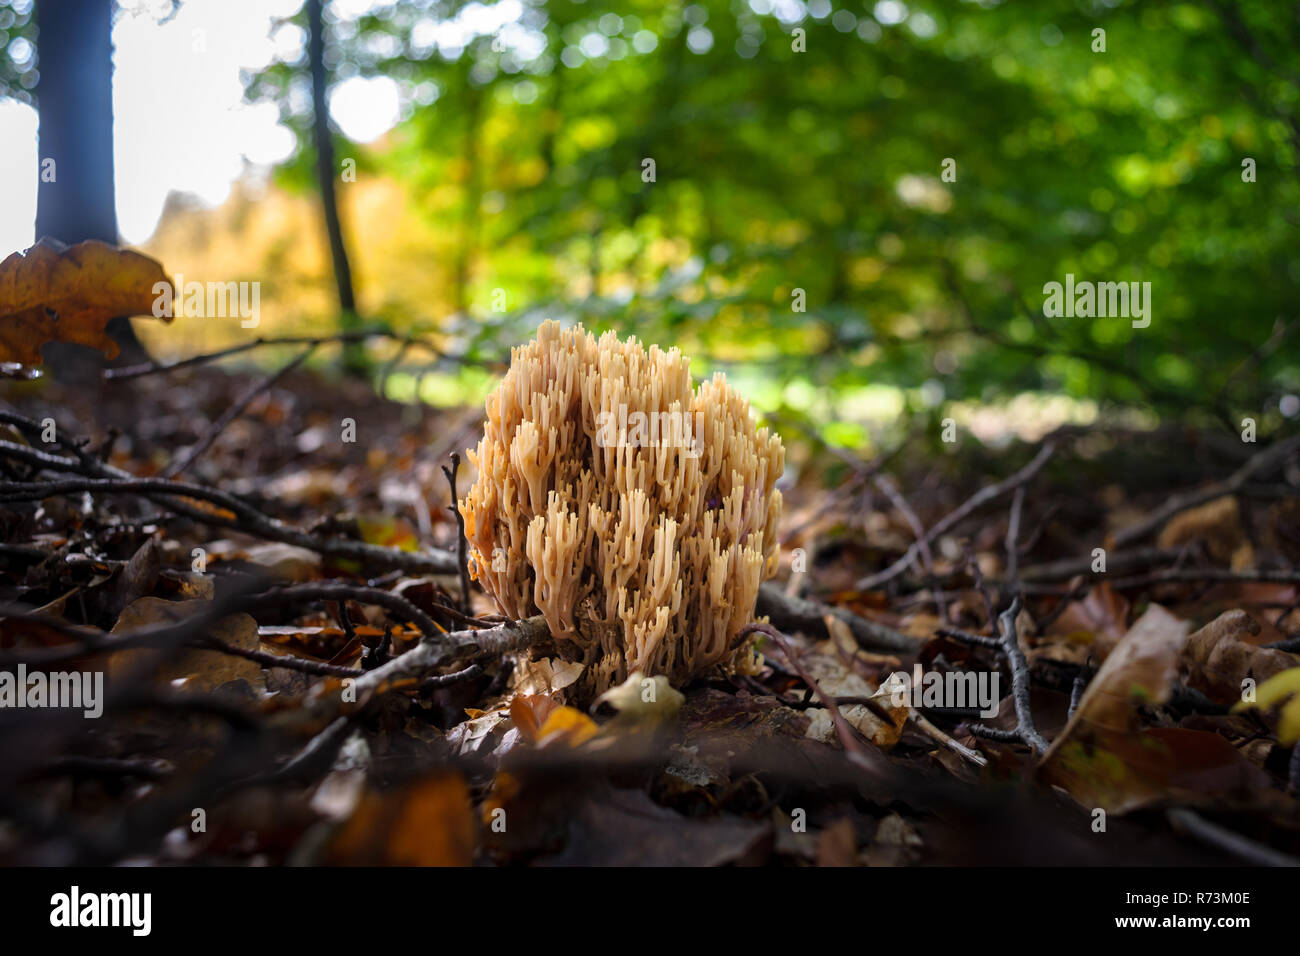 Very rare mushroom in the forest between autumn leaves. Candlestick fungus, Xylaria hypoxylon Stock Photo